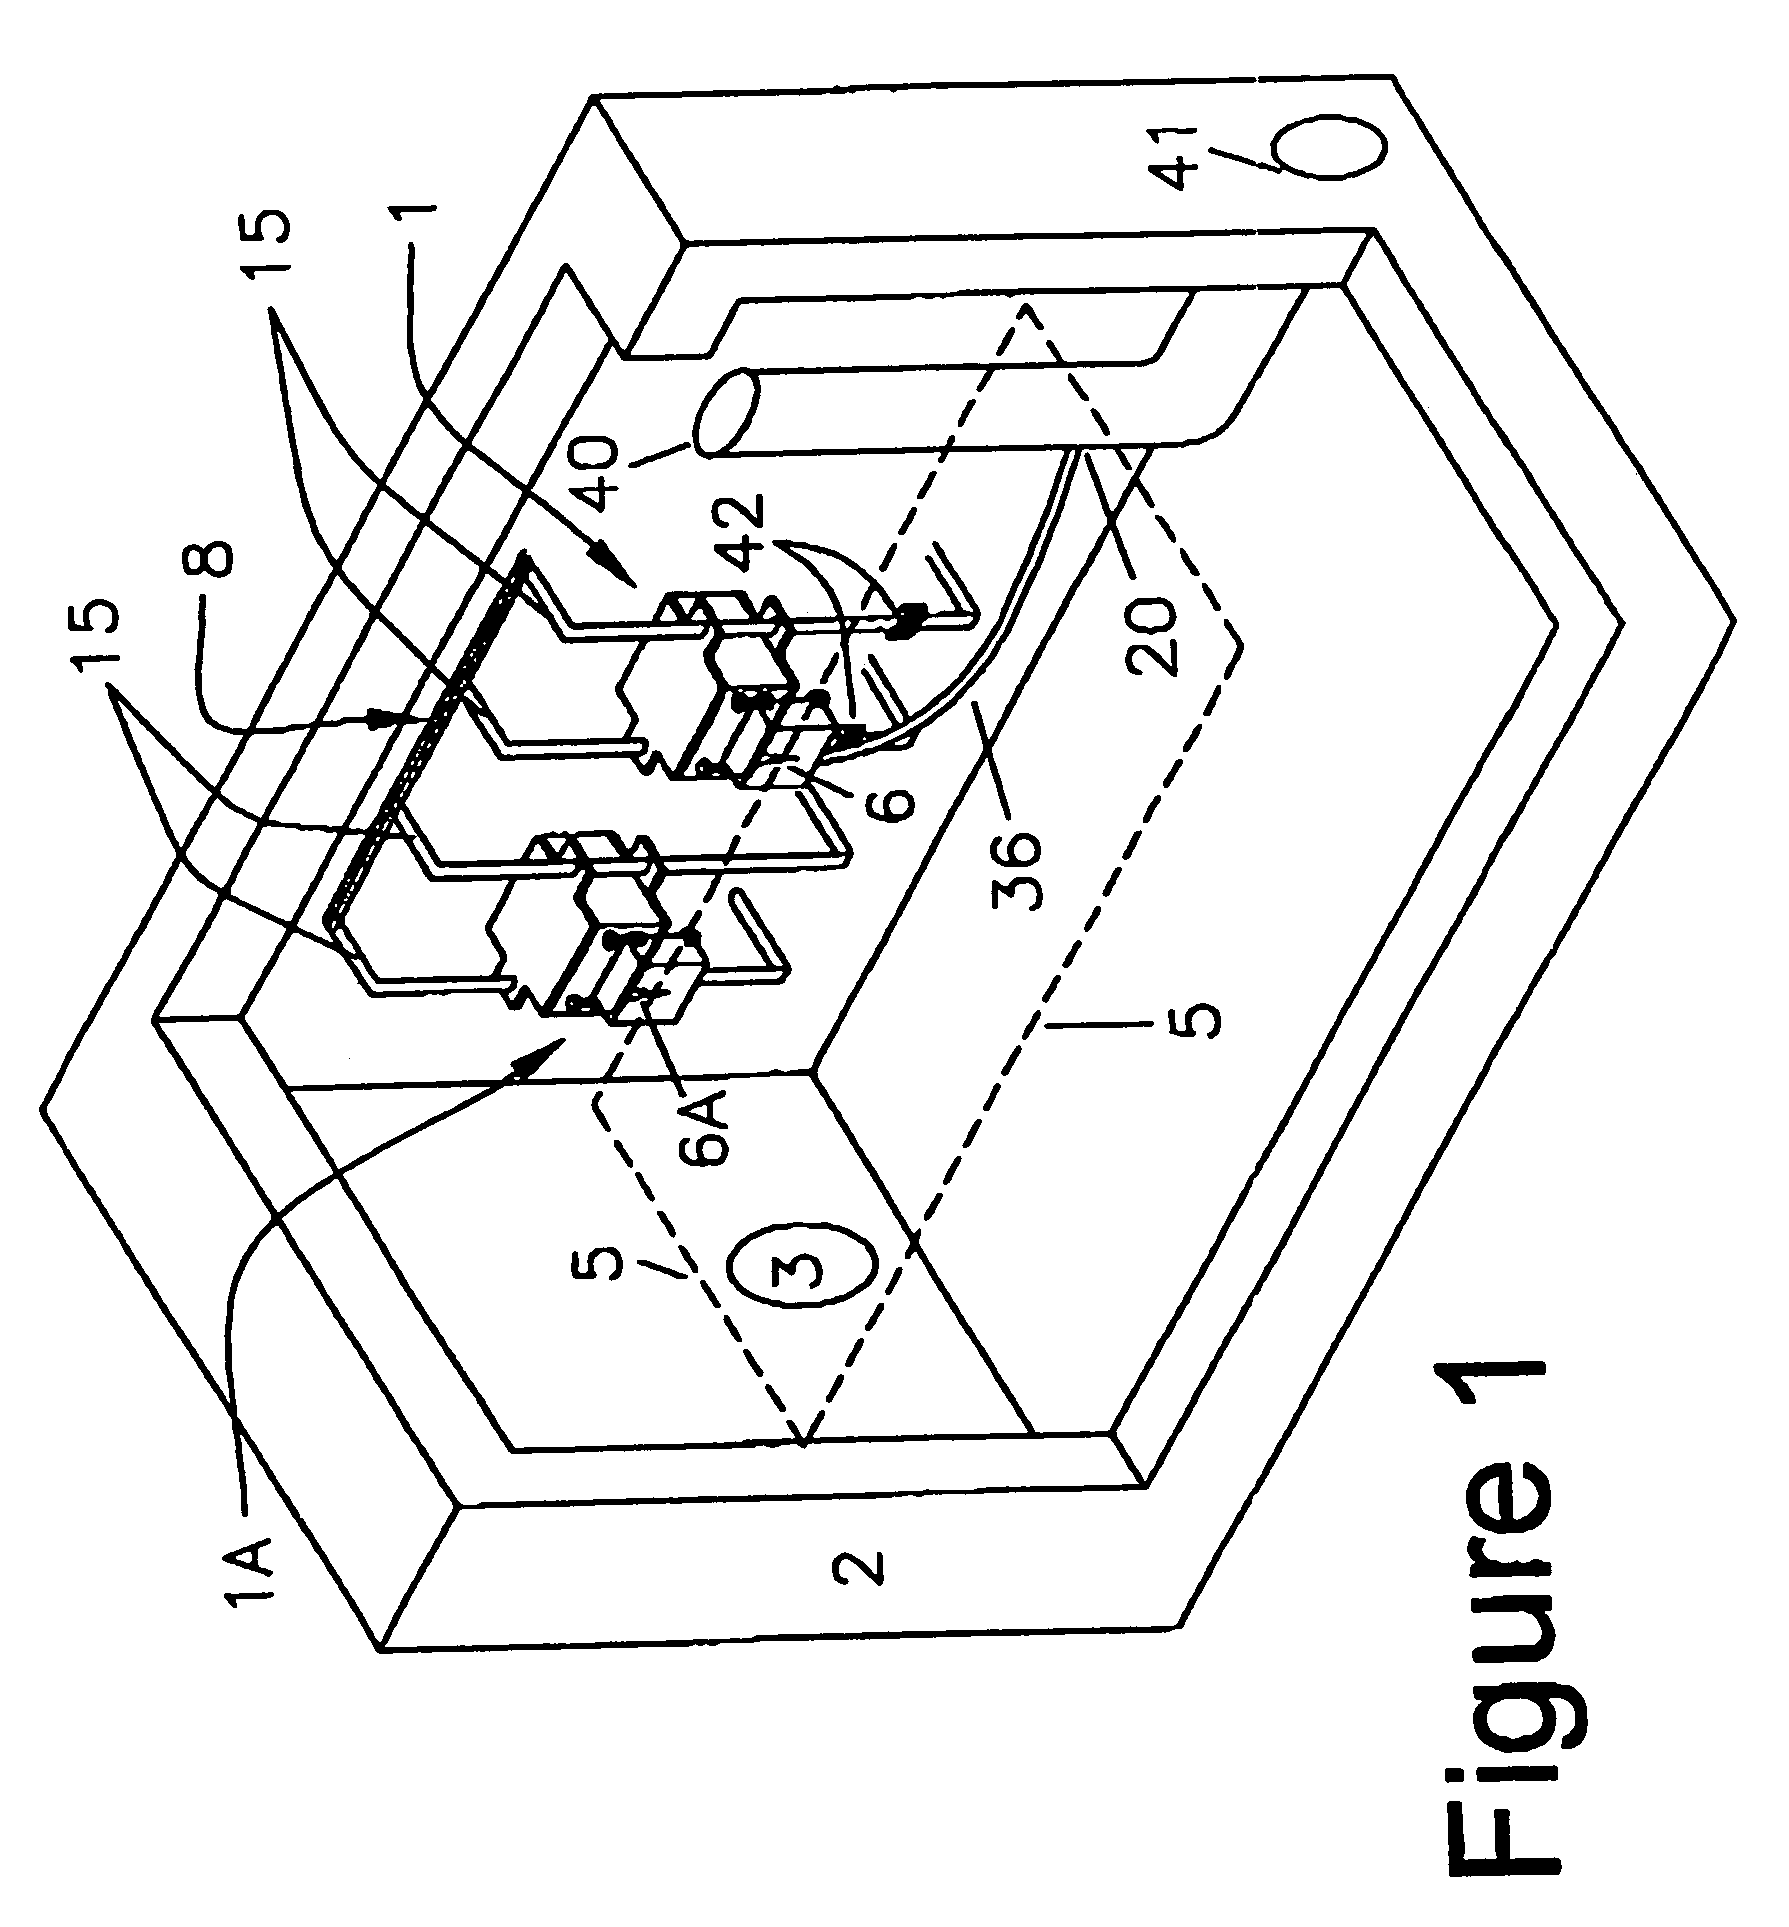 Passive method for obtaining controlled drainage from a vessel